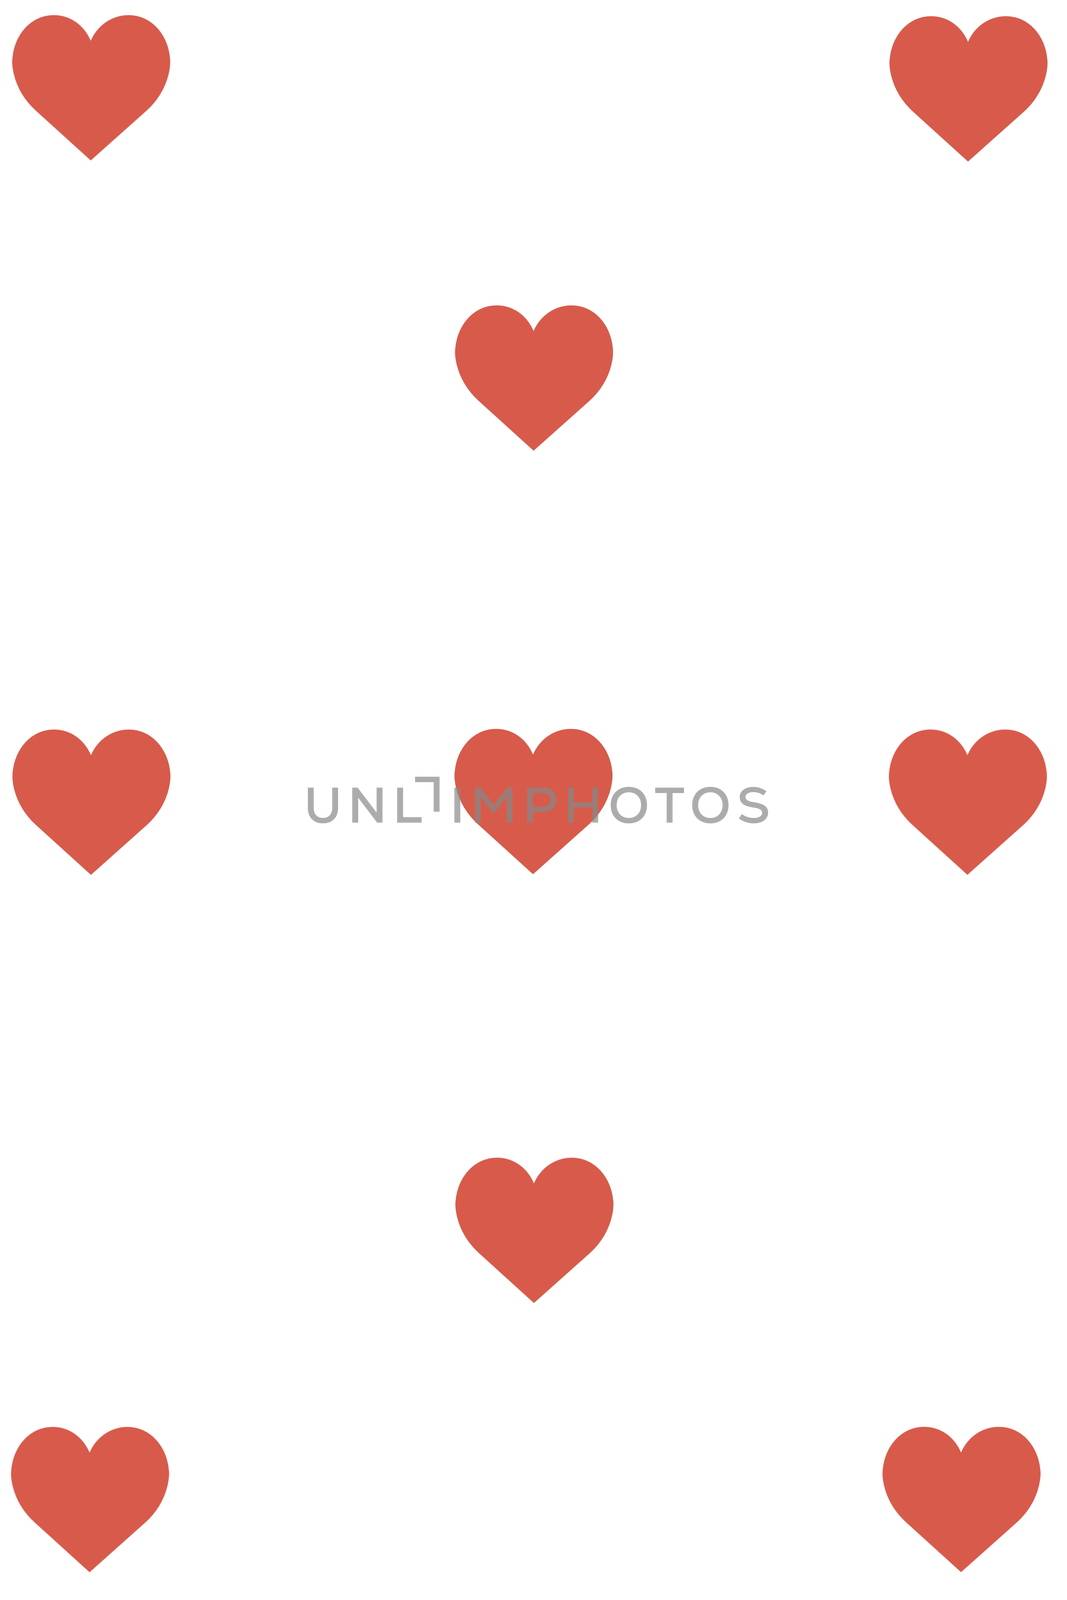 Red Hearts Design on White Background. Love, Heart, Valentine's Day. Can be used for Articles, Printing, Illustration purpose, background, website, businesses, presentations, Product Promotions etc. by sn040288